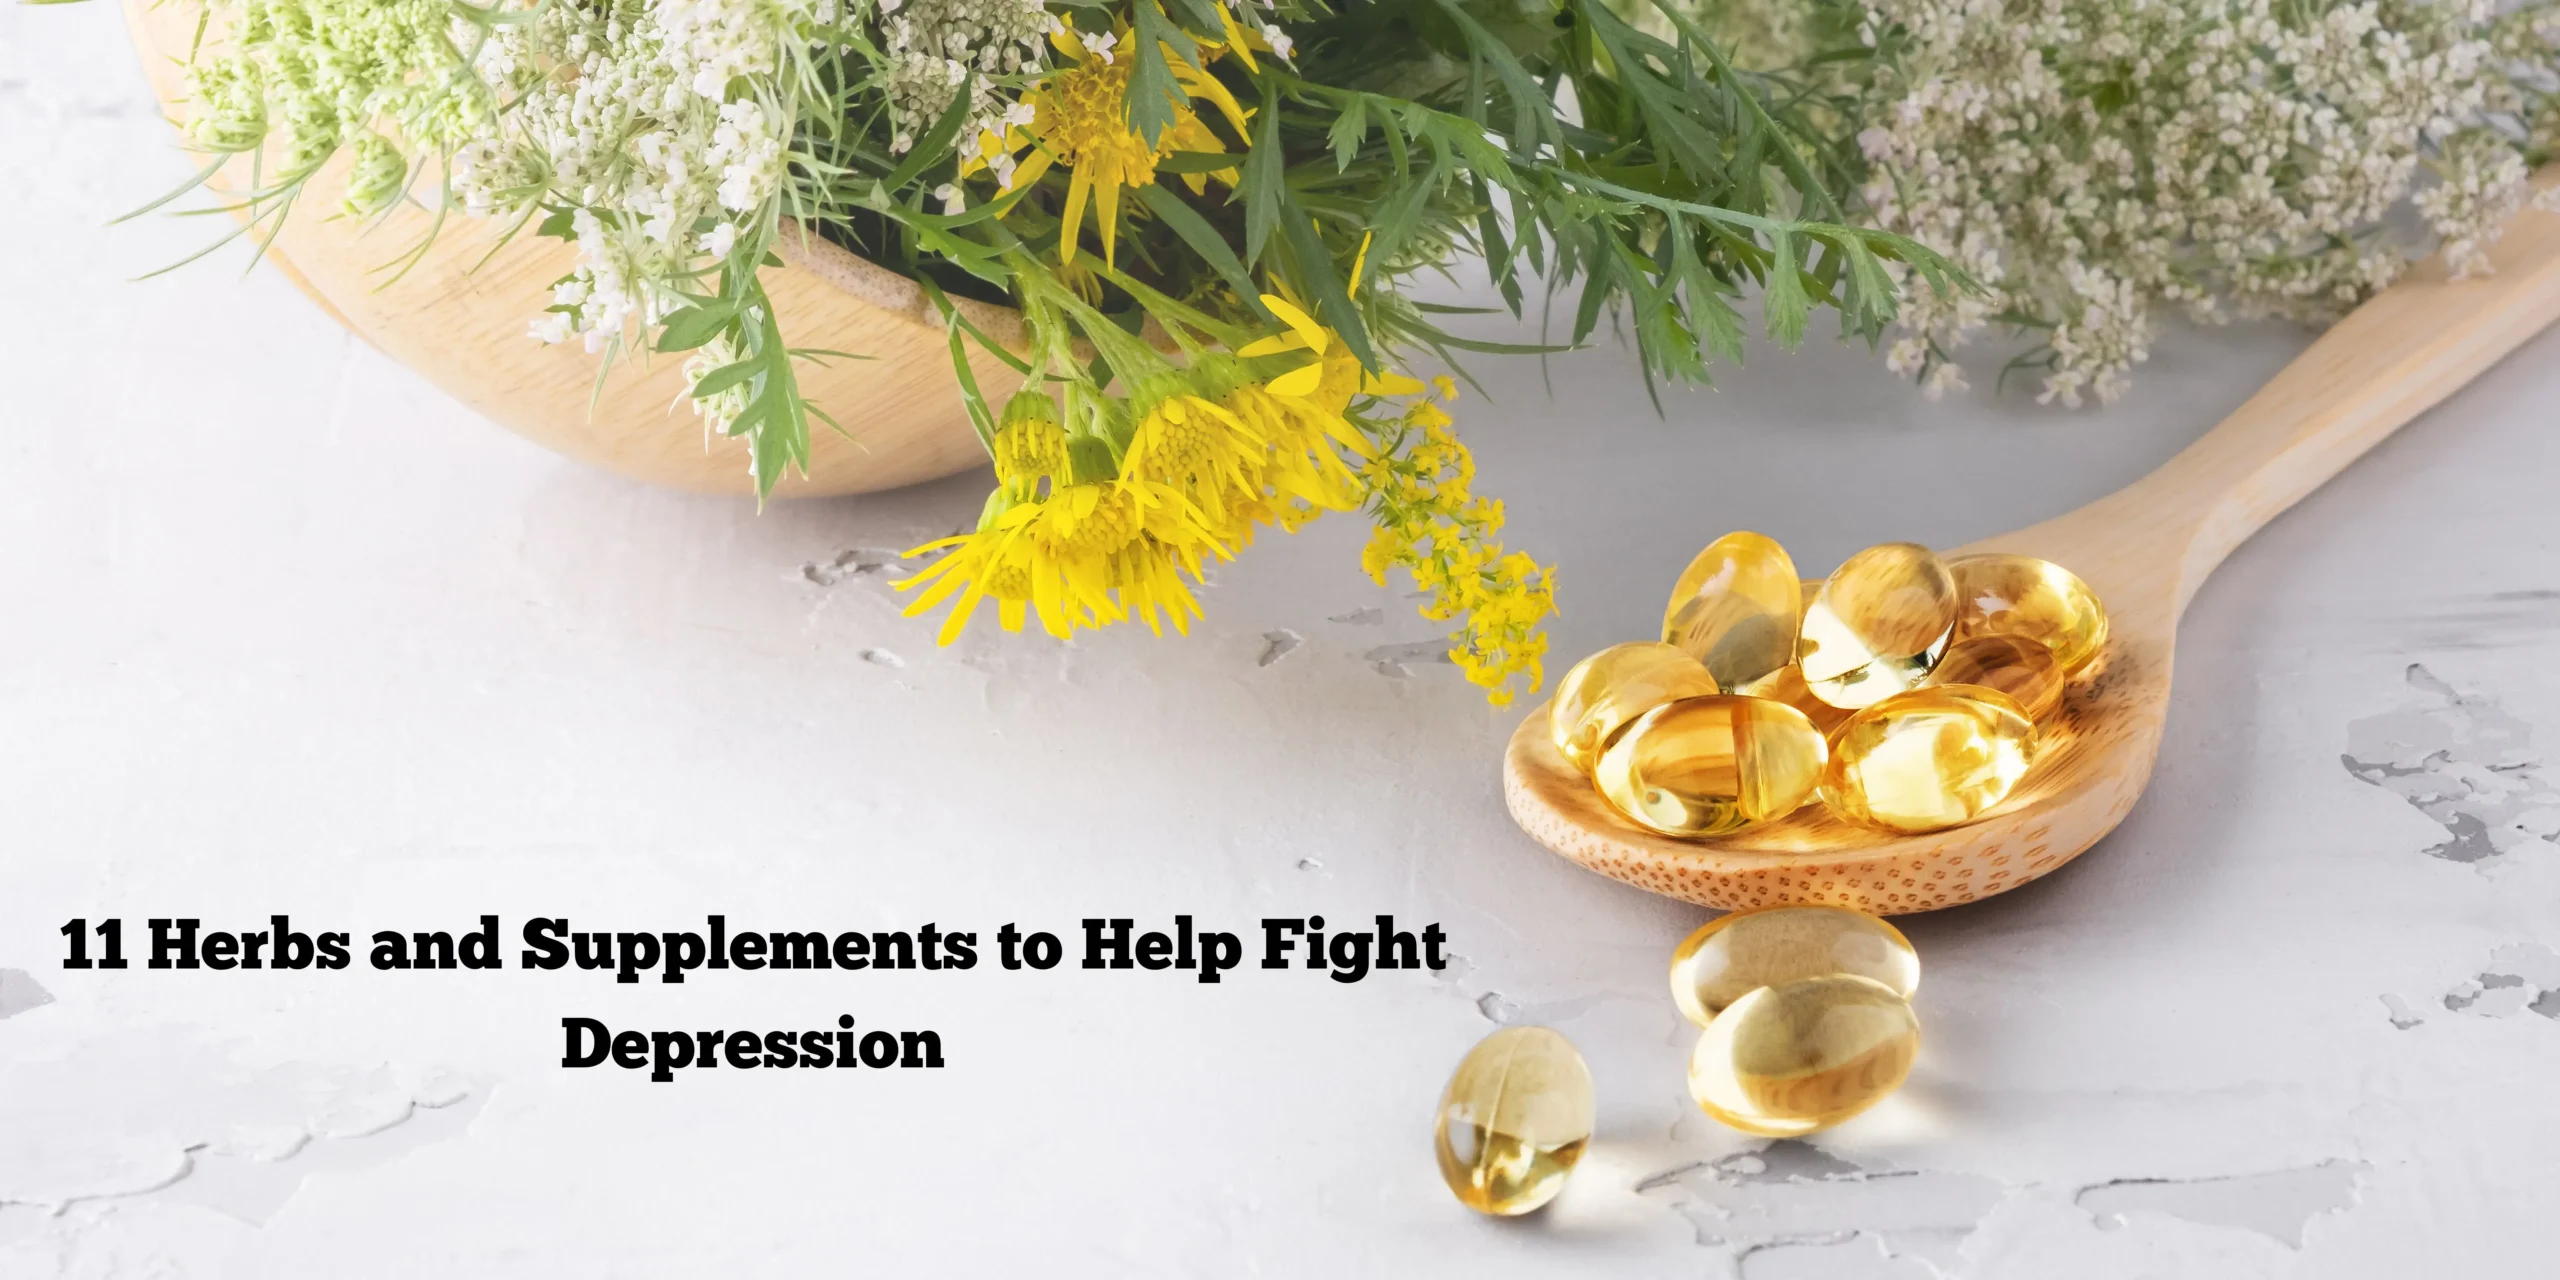 11 Herbs and Supplements to Help Fight Depression